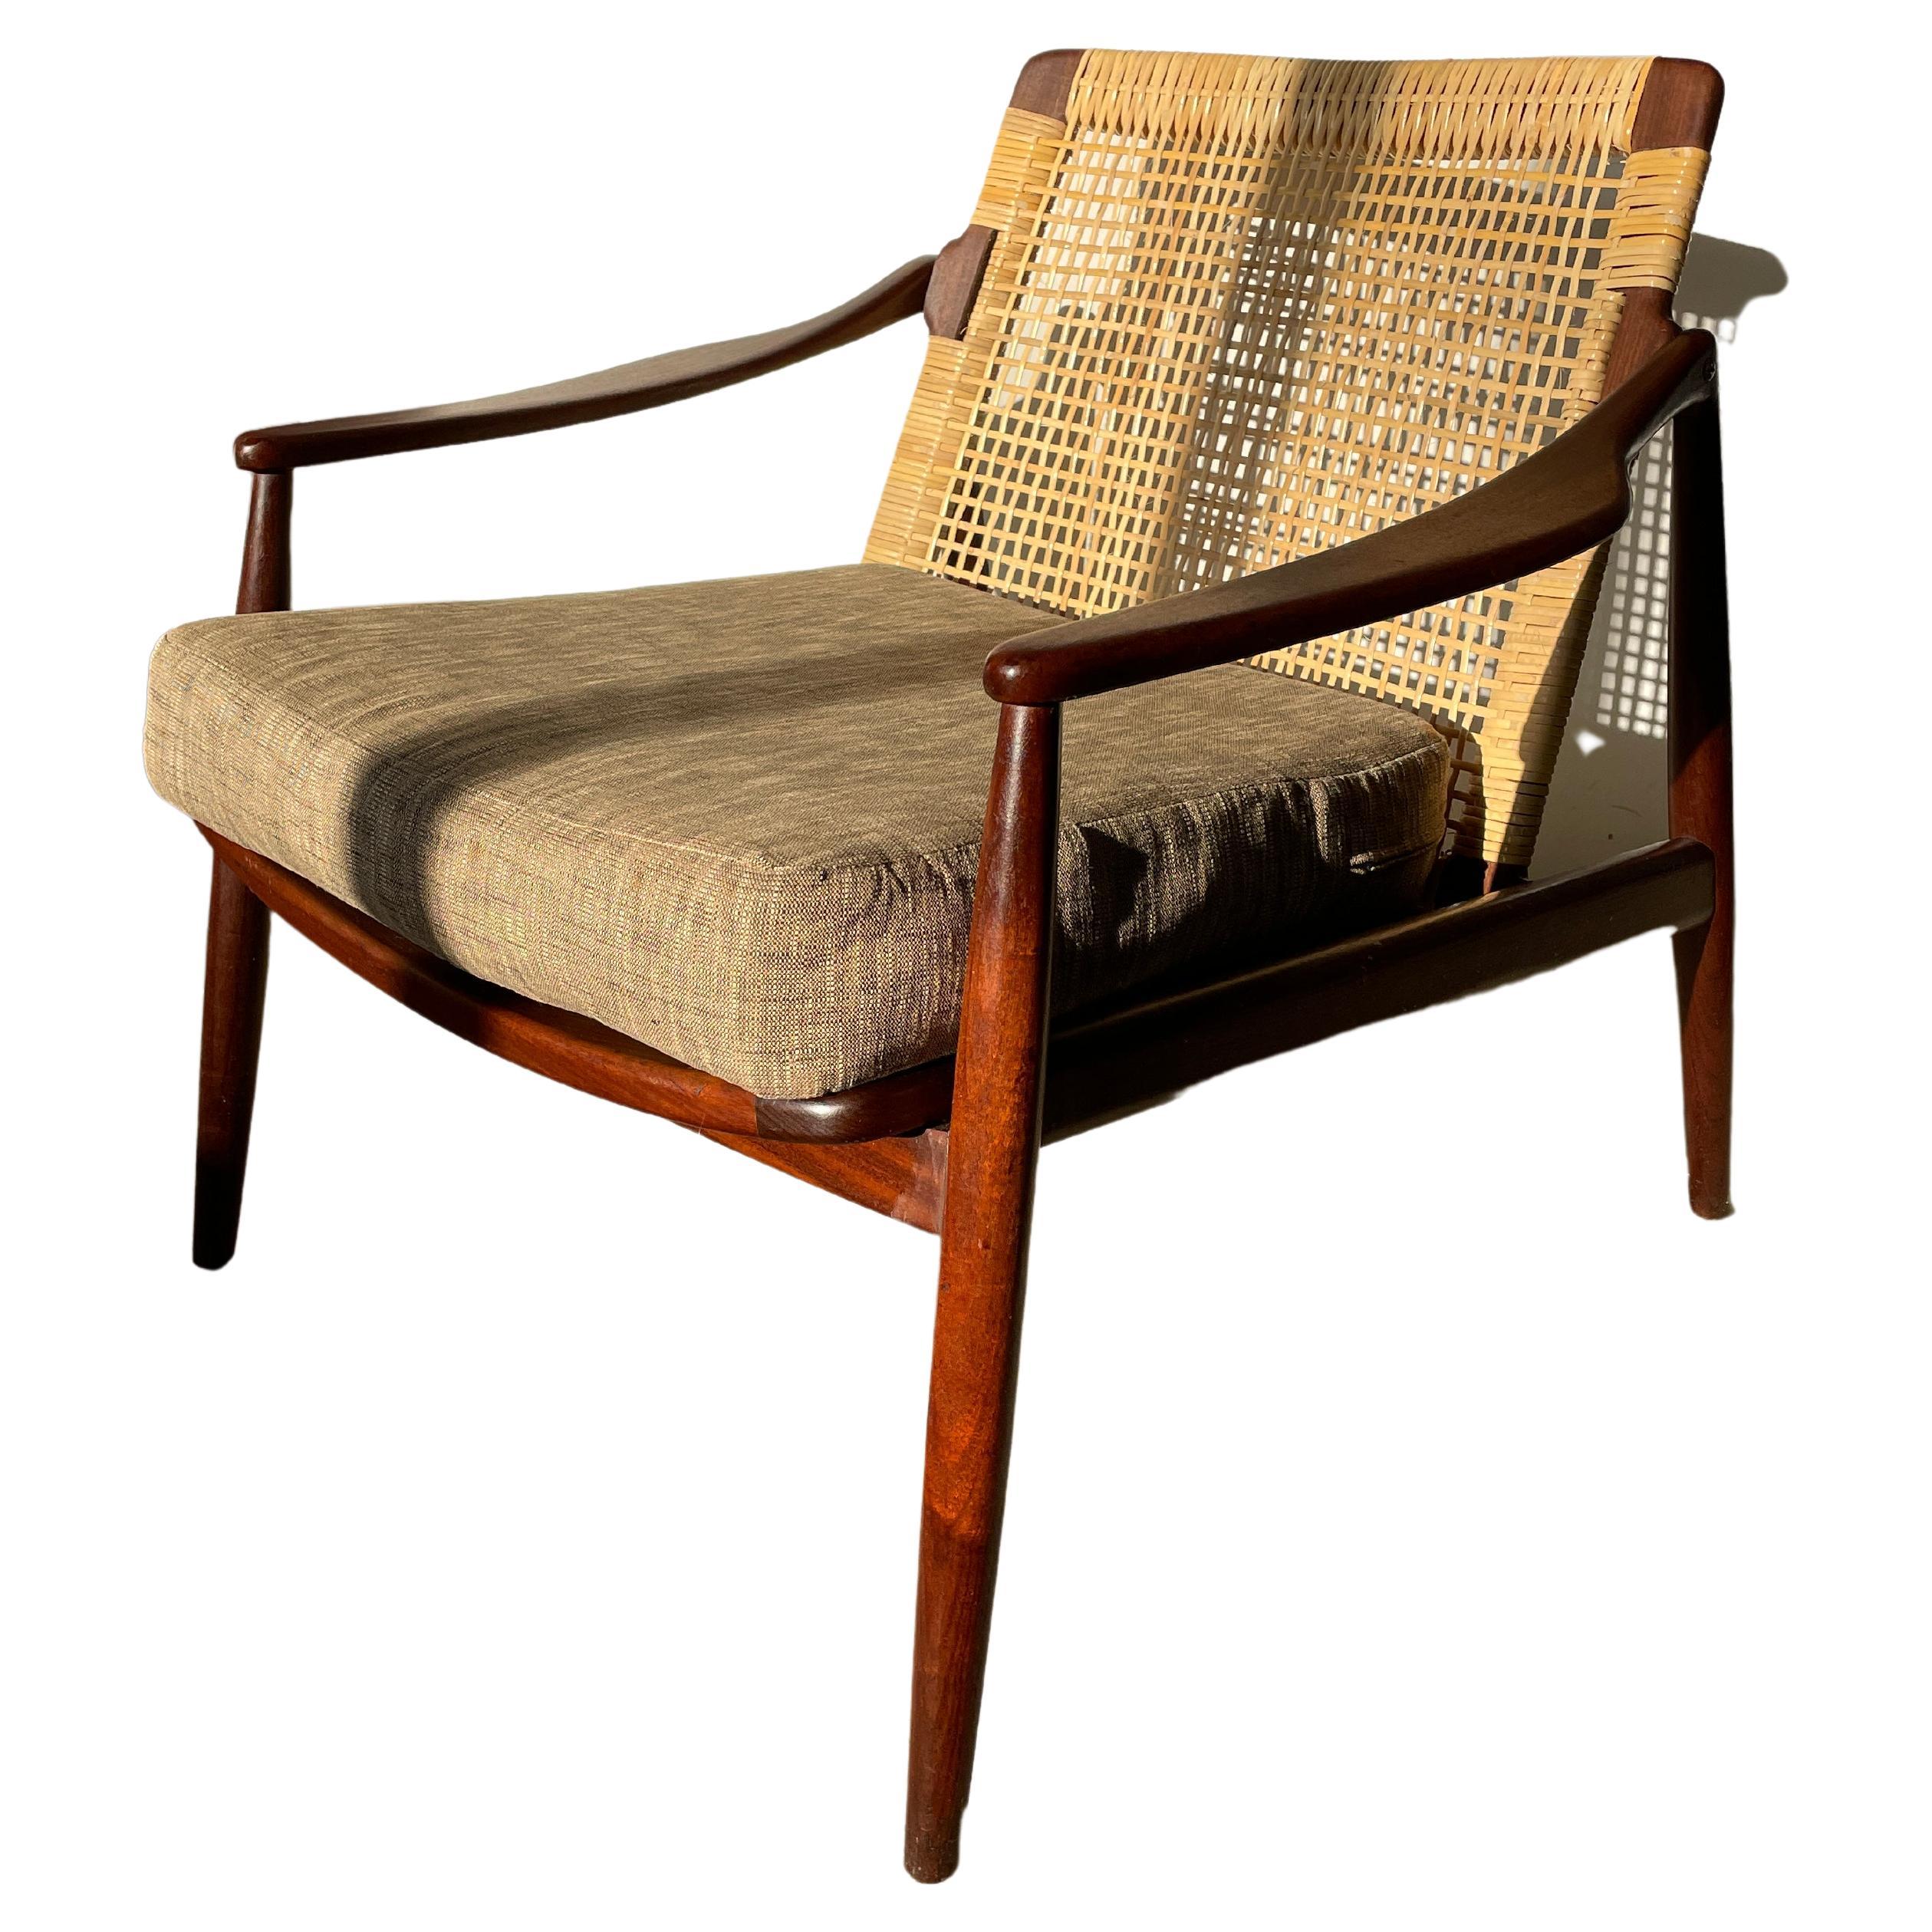 Hartmut Lohmeyer Lounge Chair in Teak and Cane